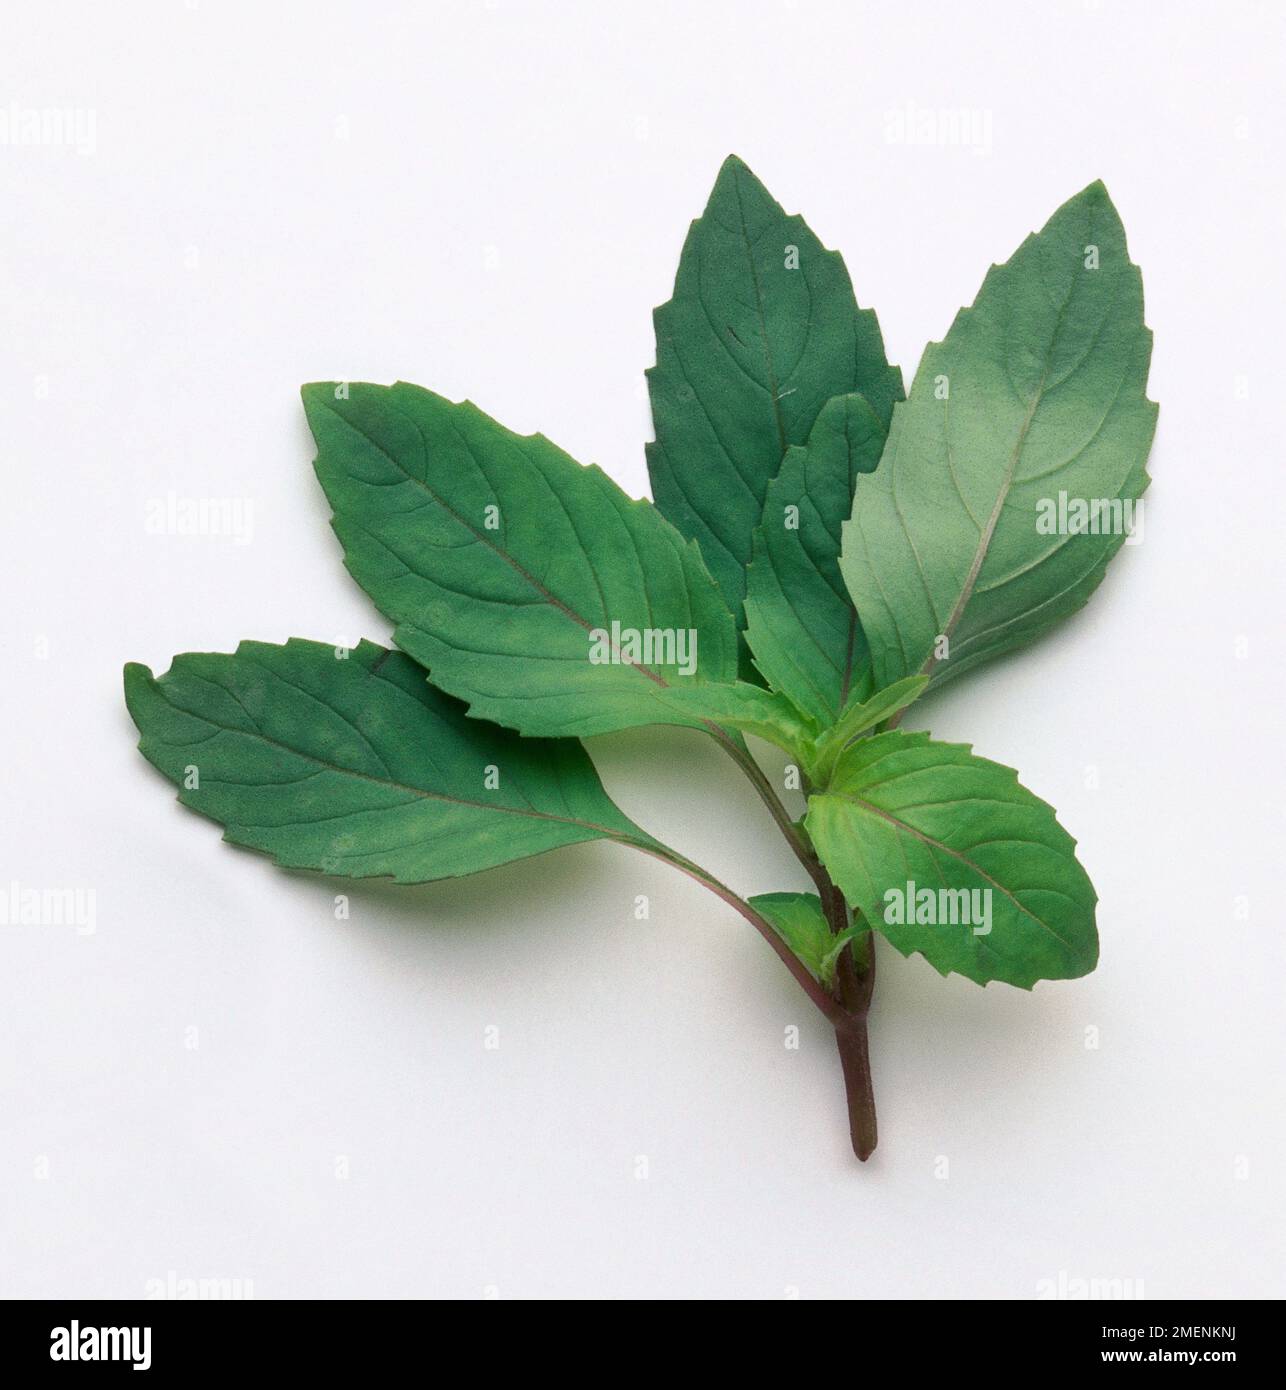 Anise Basil: A stalk of basil with seven leaves which have strong veins running through them. Stock Photo